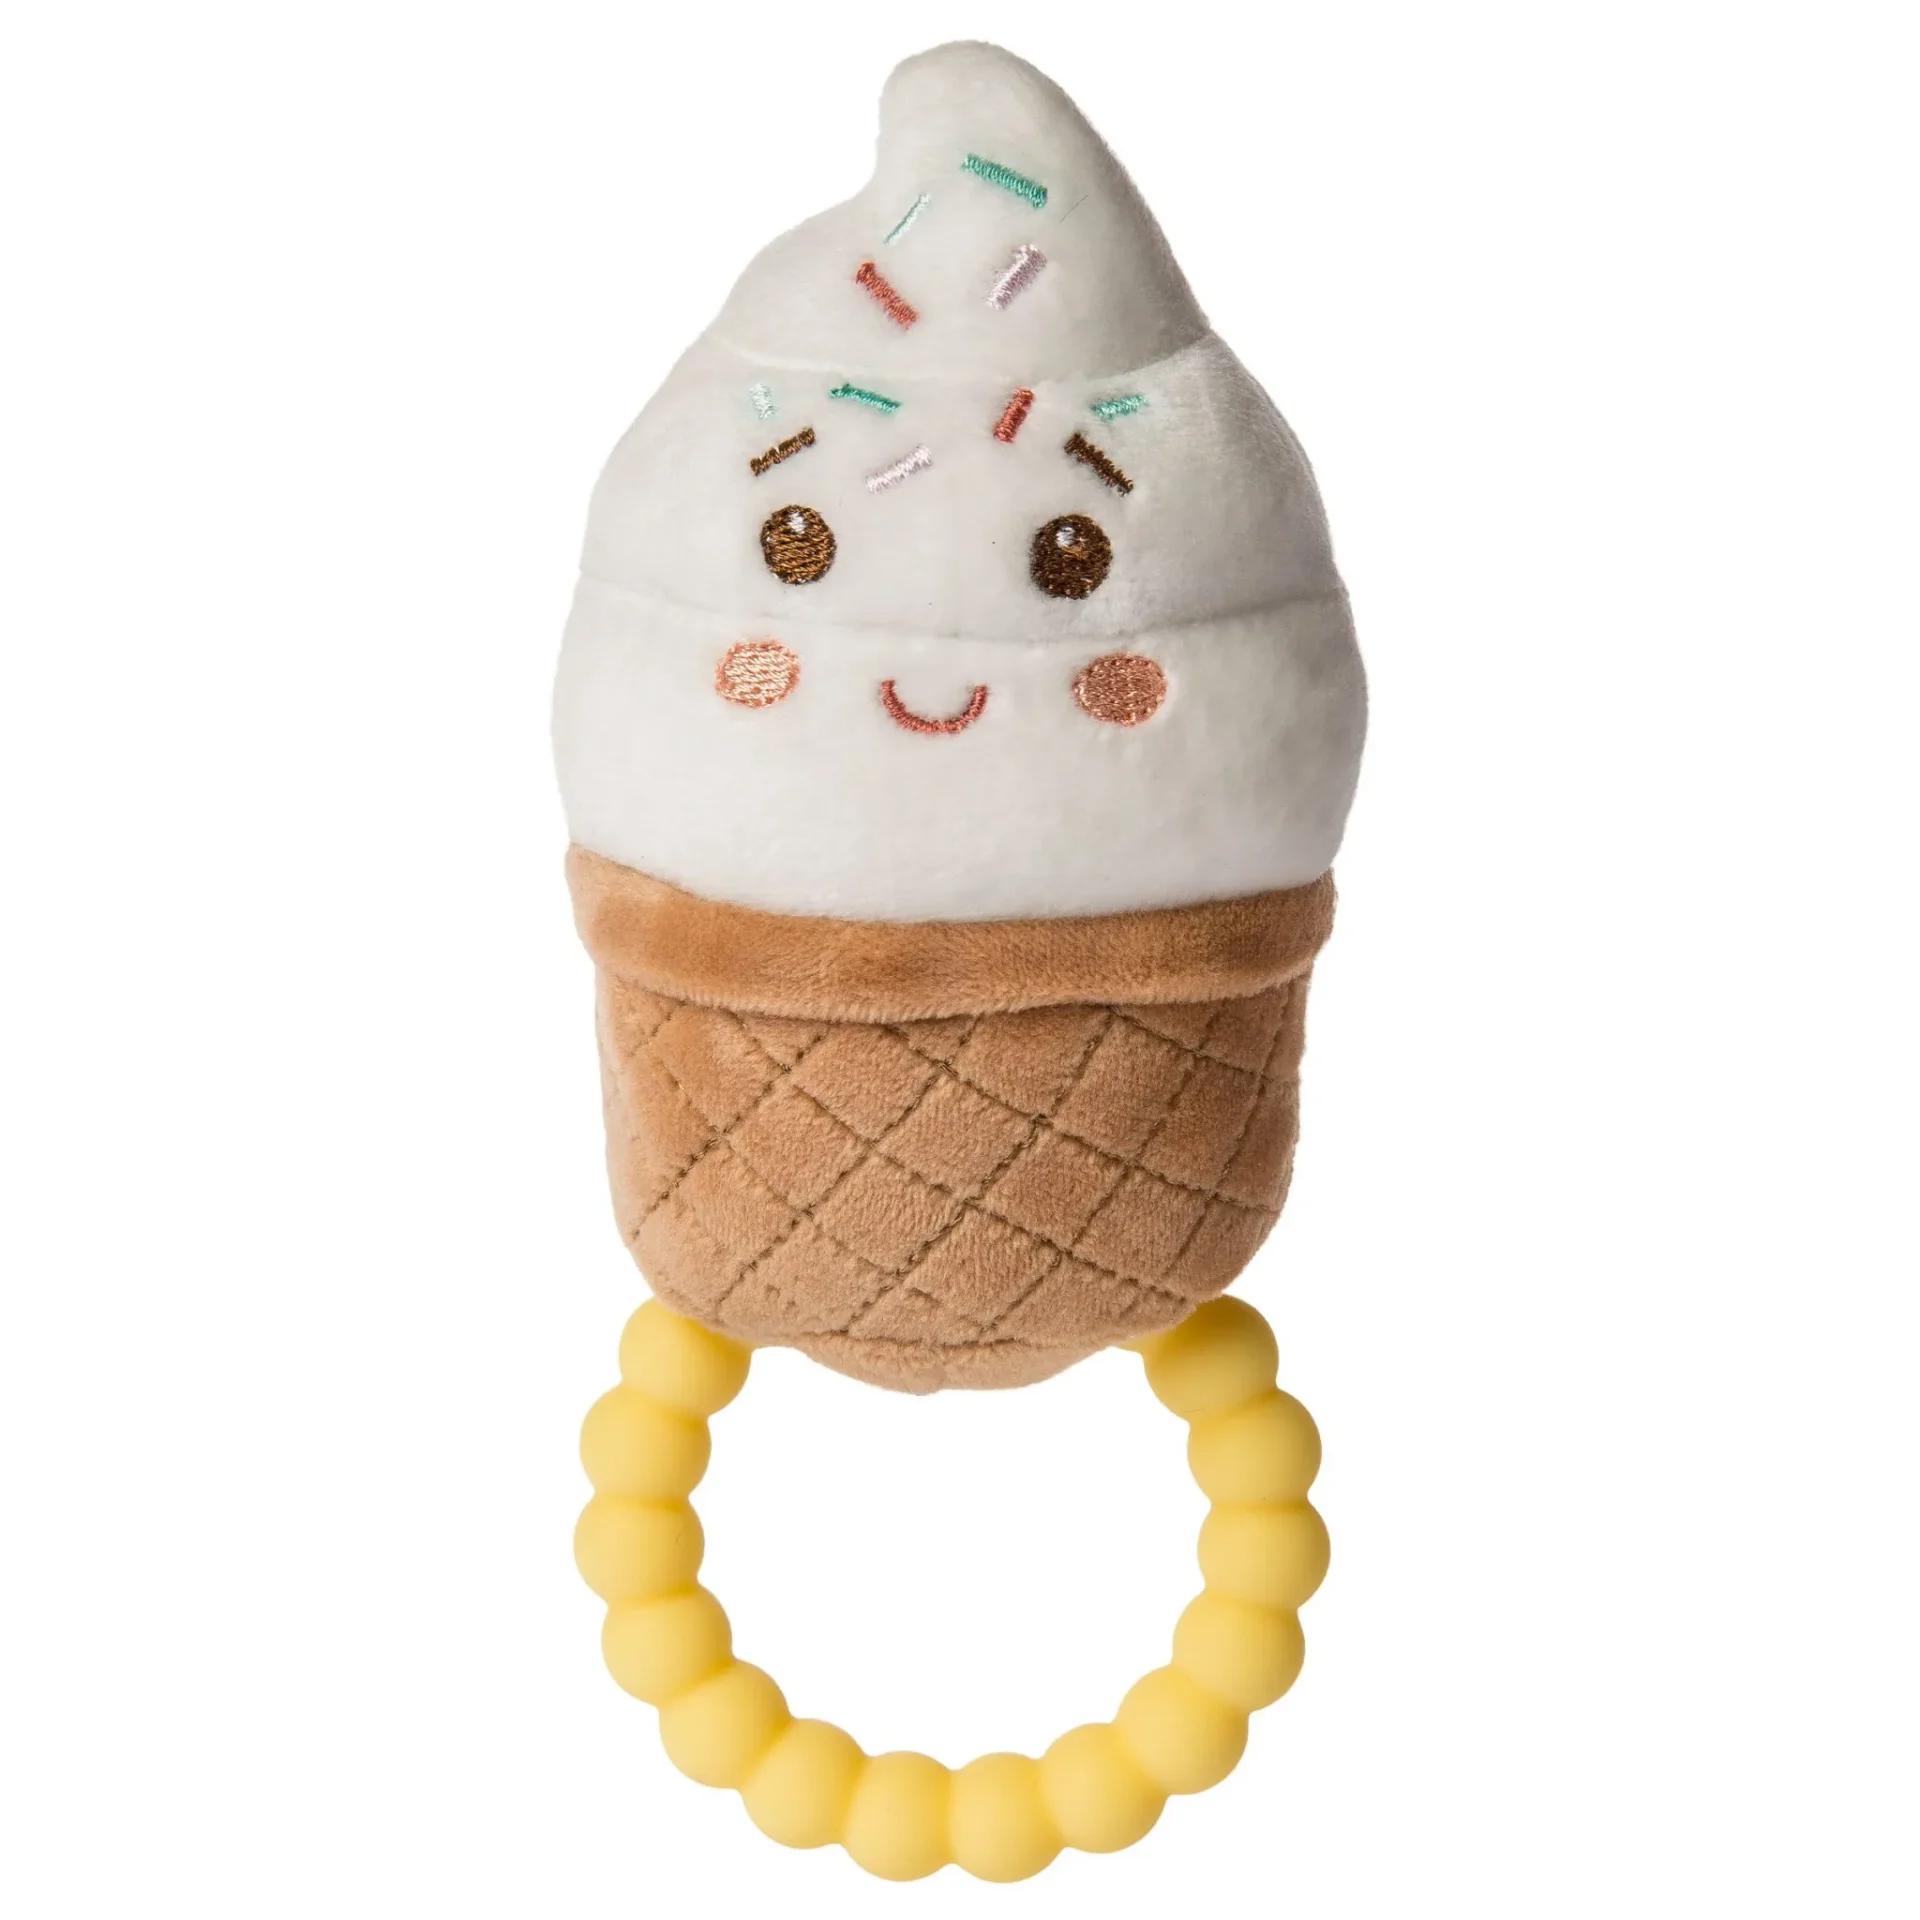 ice cream rattle toy that makes rattling noise